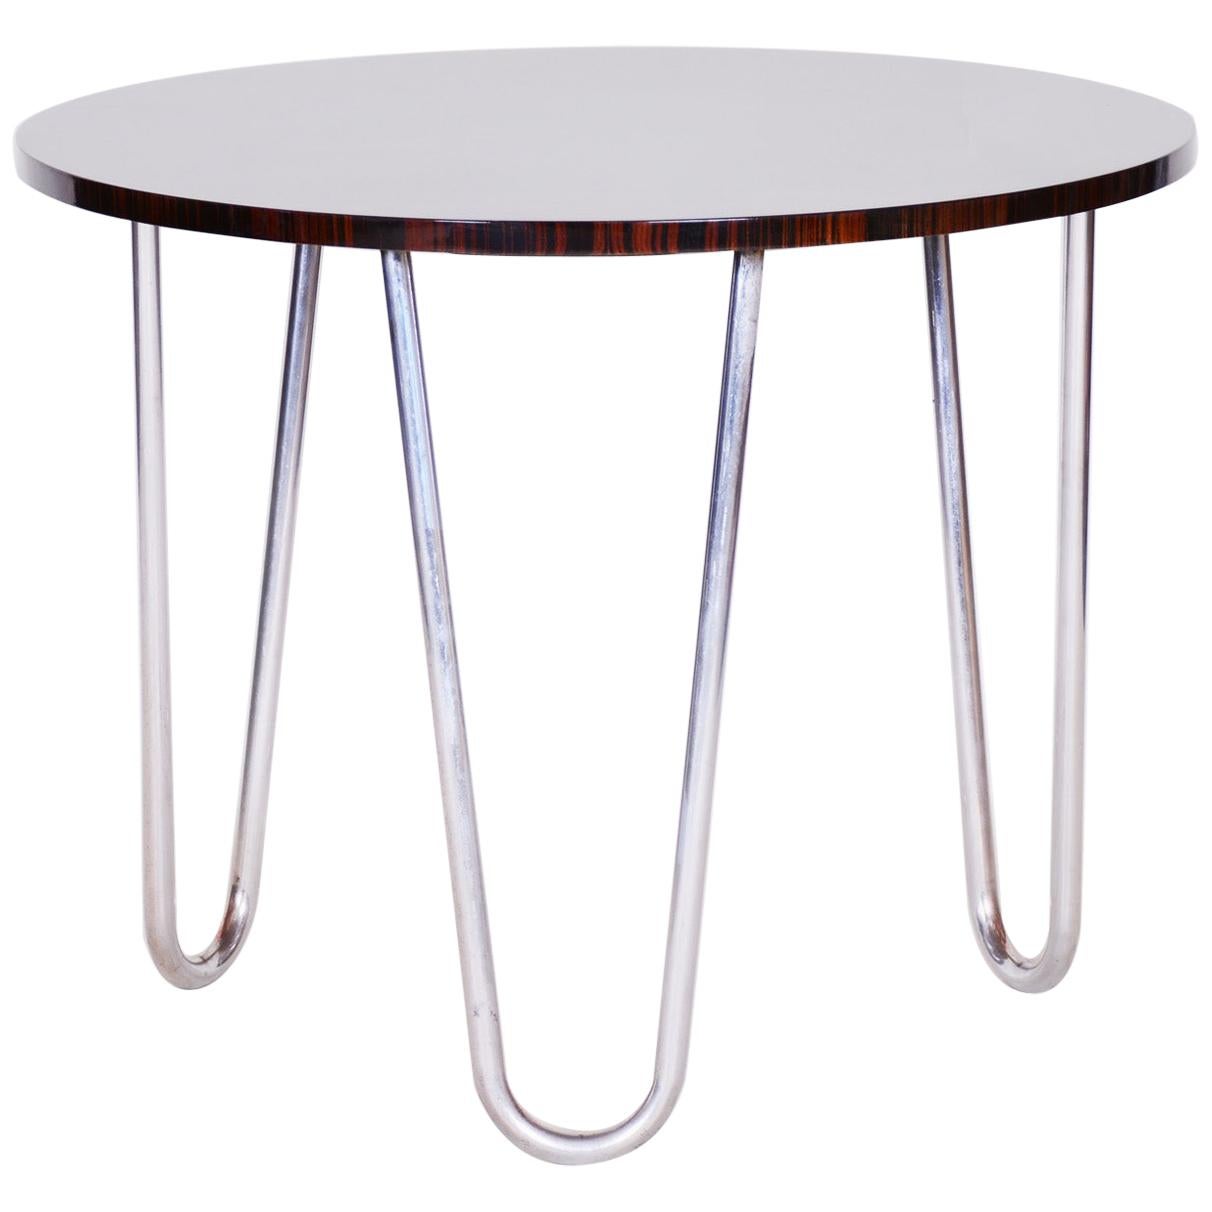 20th Century Restored Rounded Macassar Bauhaus Table, Chrome-Plated Steel, 1930s